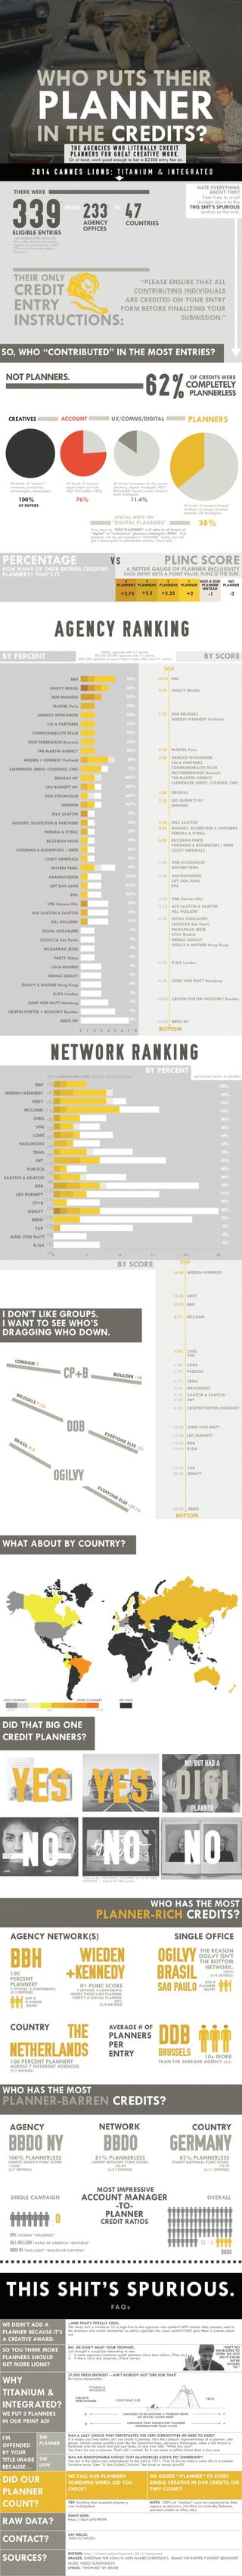 WHO PUTS THEIR PLANNER IN THE CREDITS? [INFOGRAPHIC]